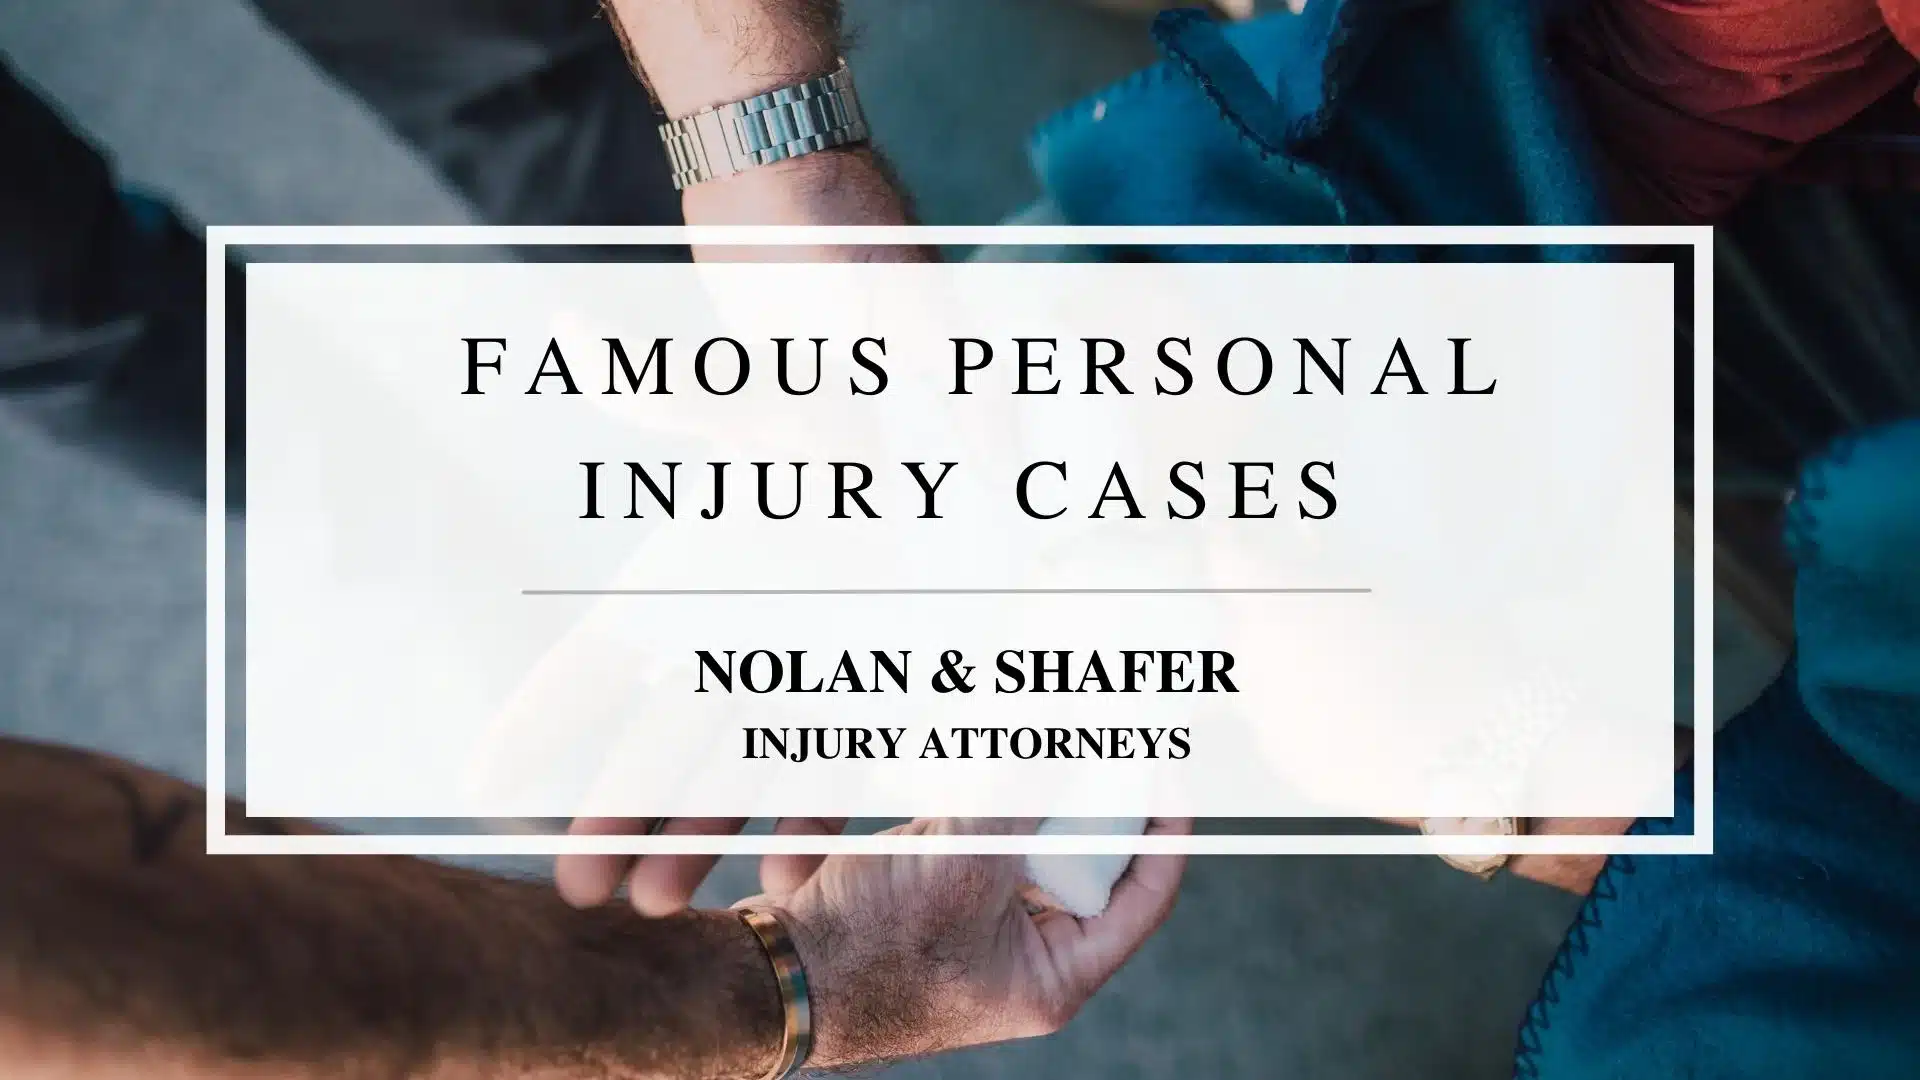 Featured image of the five famous personal injury cases